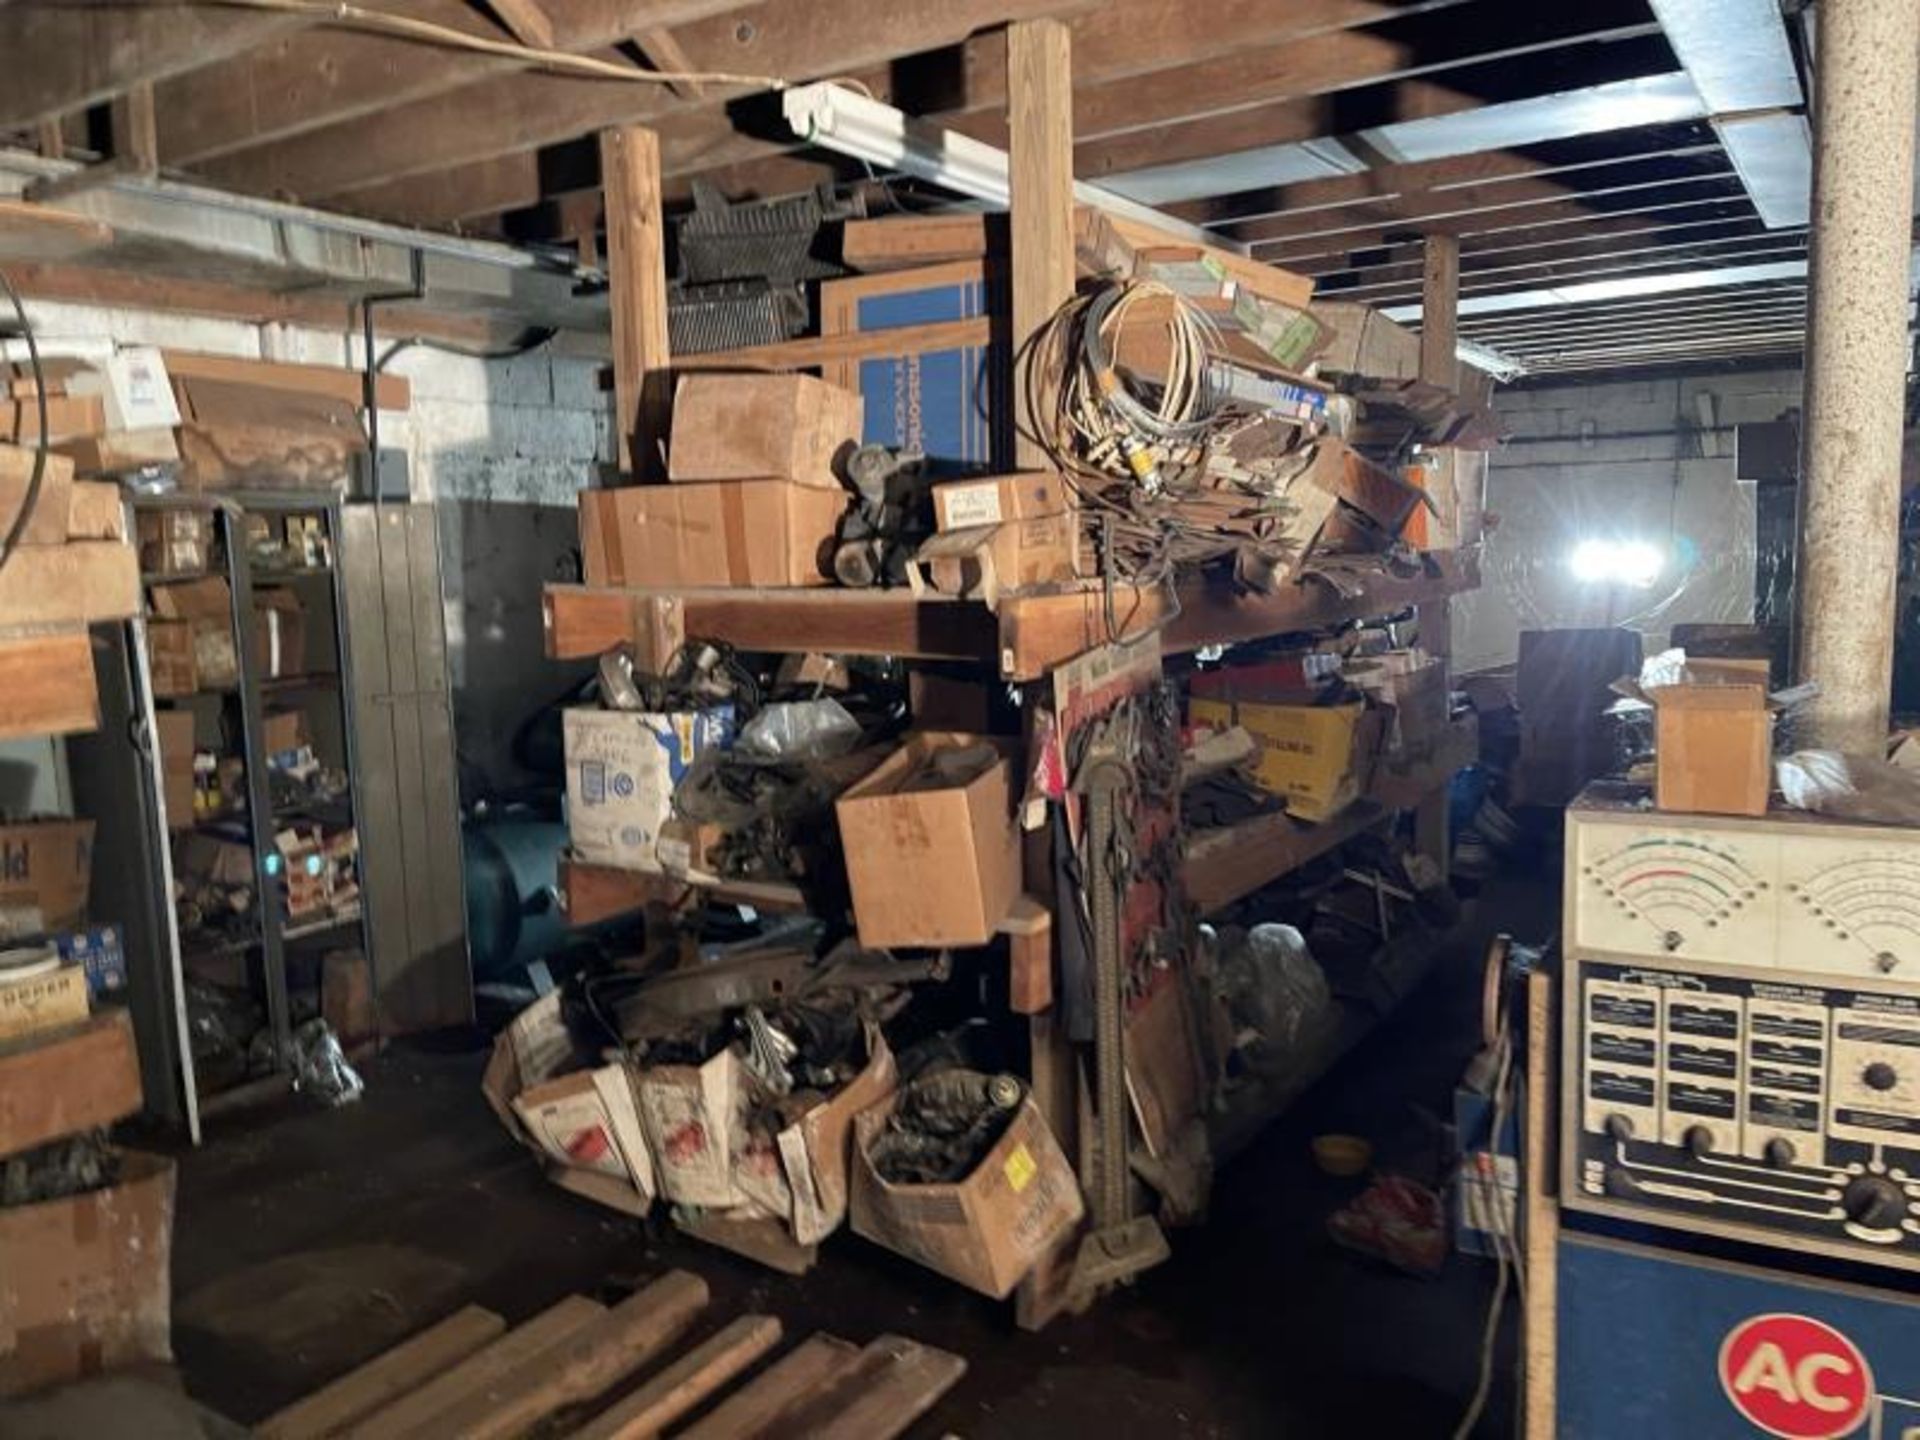 Contents Of Basement: Old Car Parts, Engine Parts, Body Parts, Starters, Alternators, All Must Be - Image 22 of 37